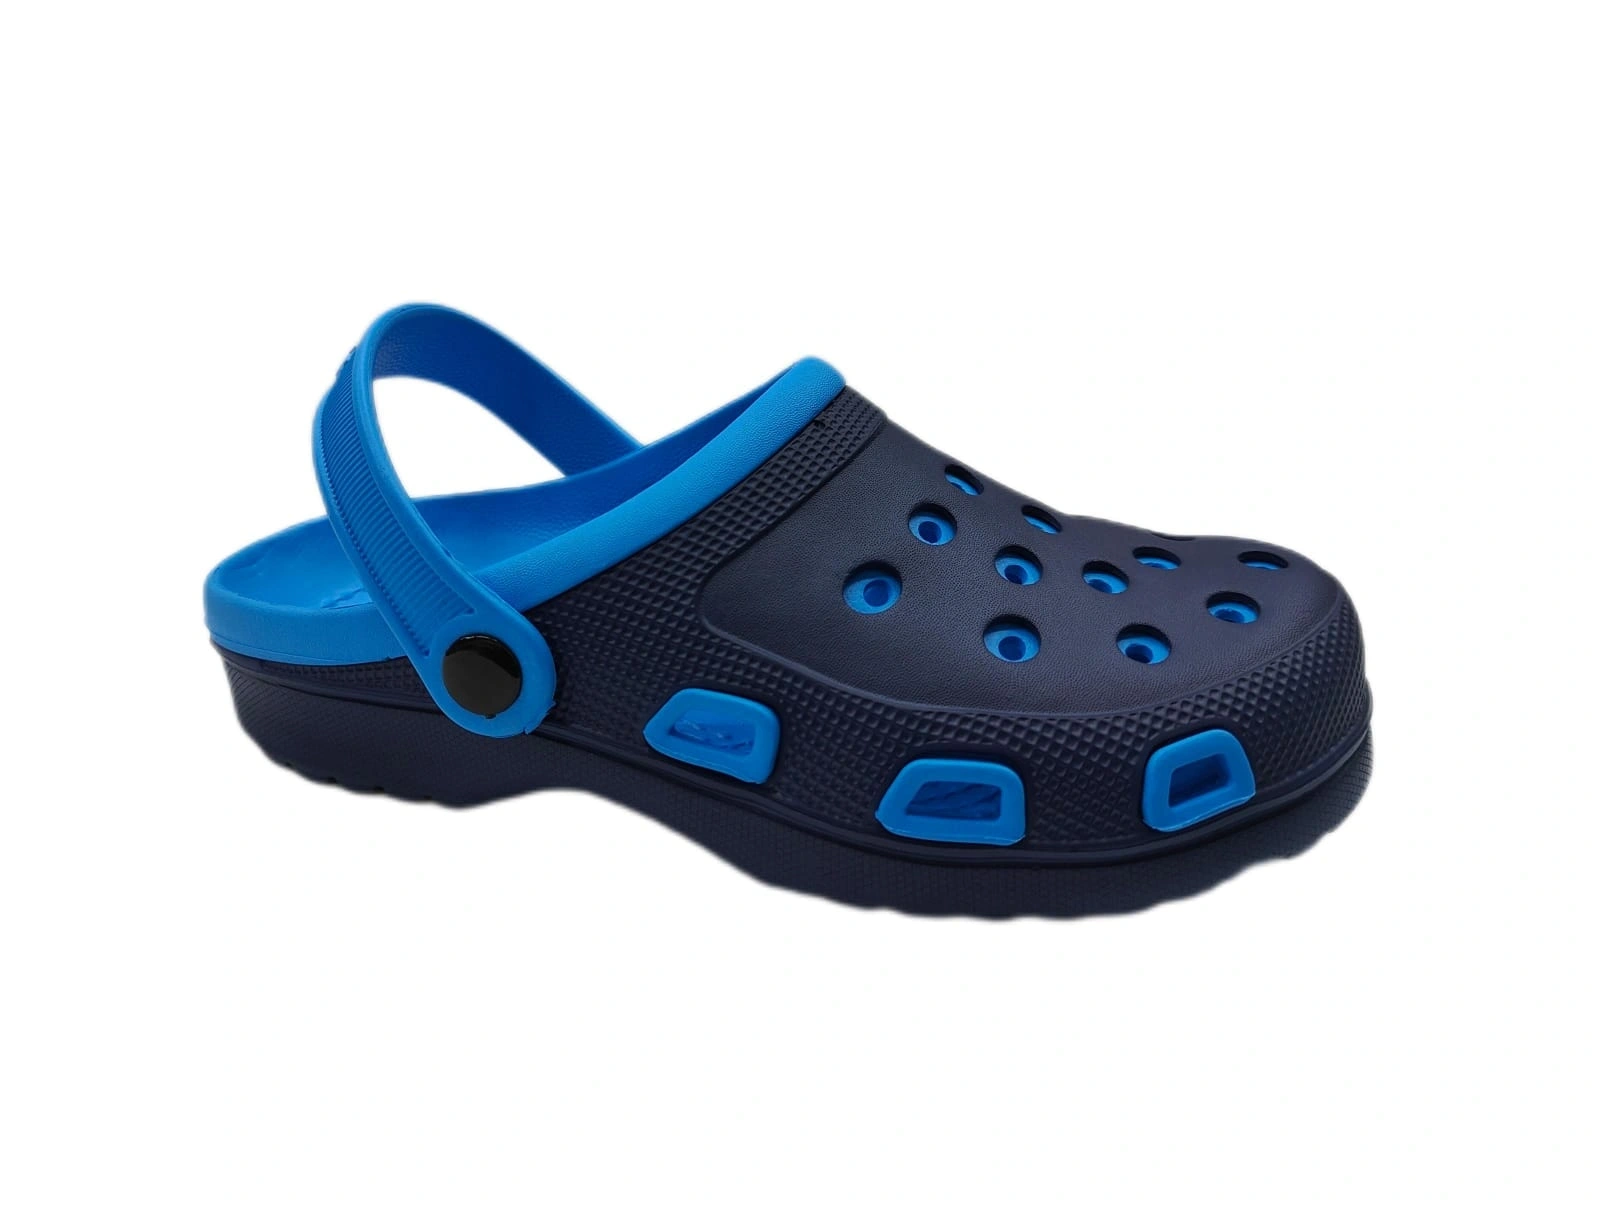 Clog Sandals for Men and Women: Comfortable, Lightweight Design with Durable Upper and Slip-Resistant Outsole for All-Day Wear-Blue-UK 9-3